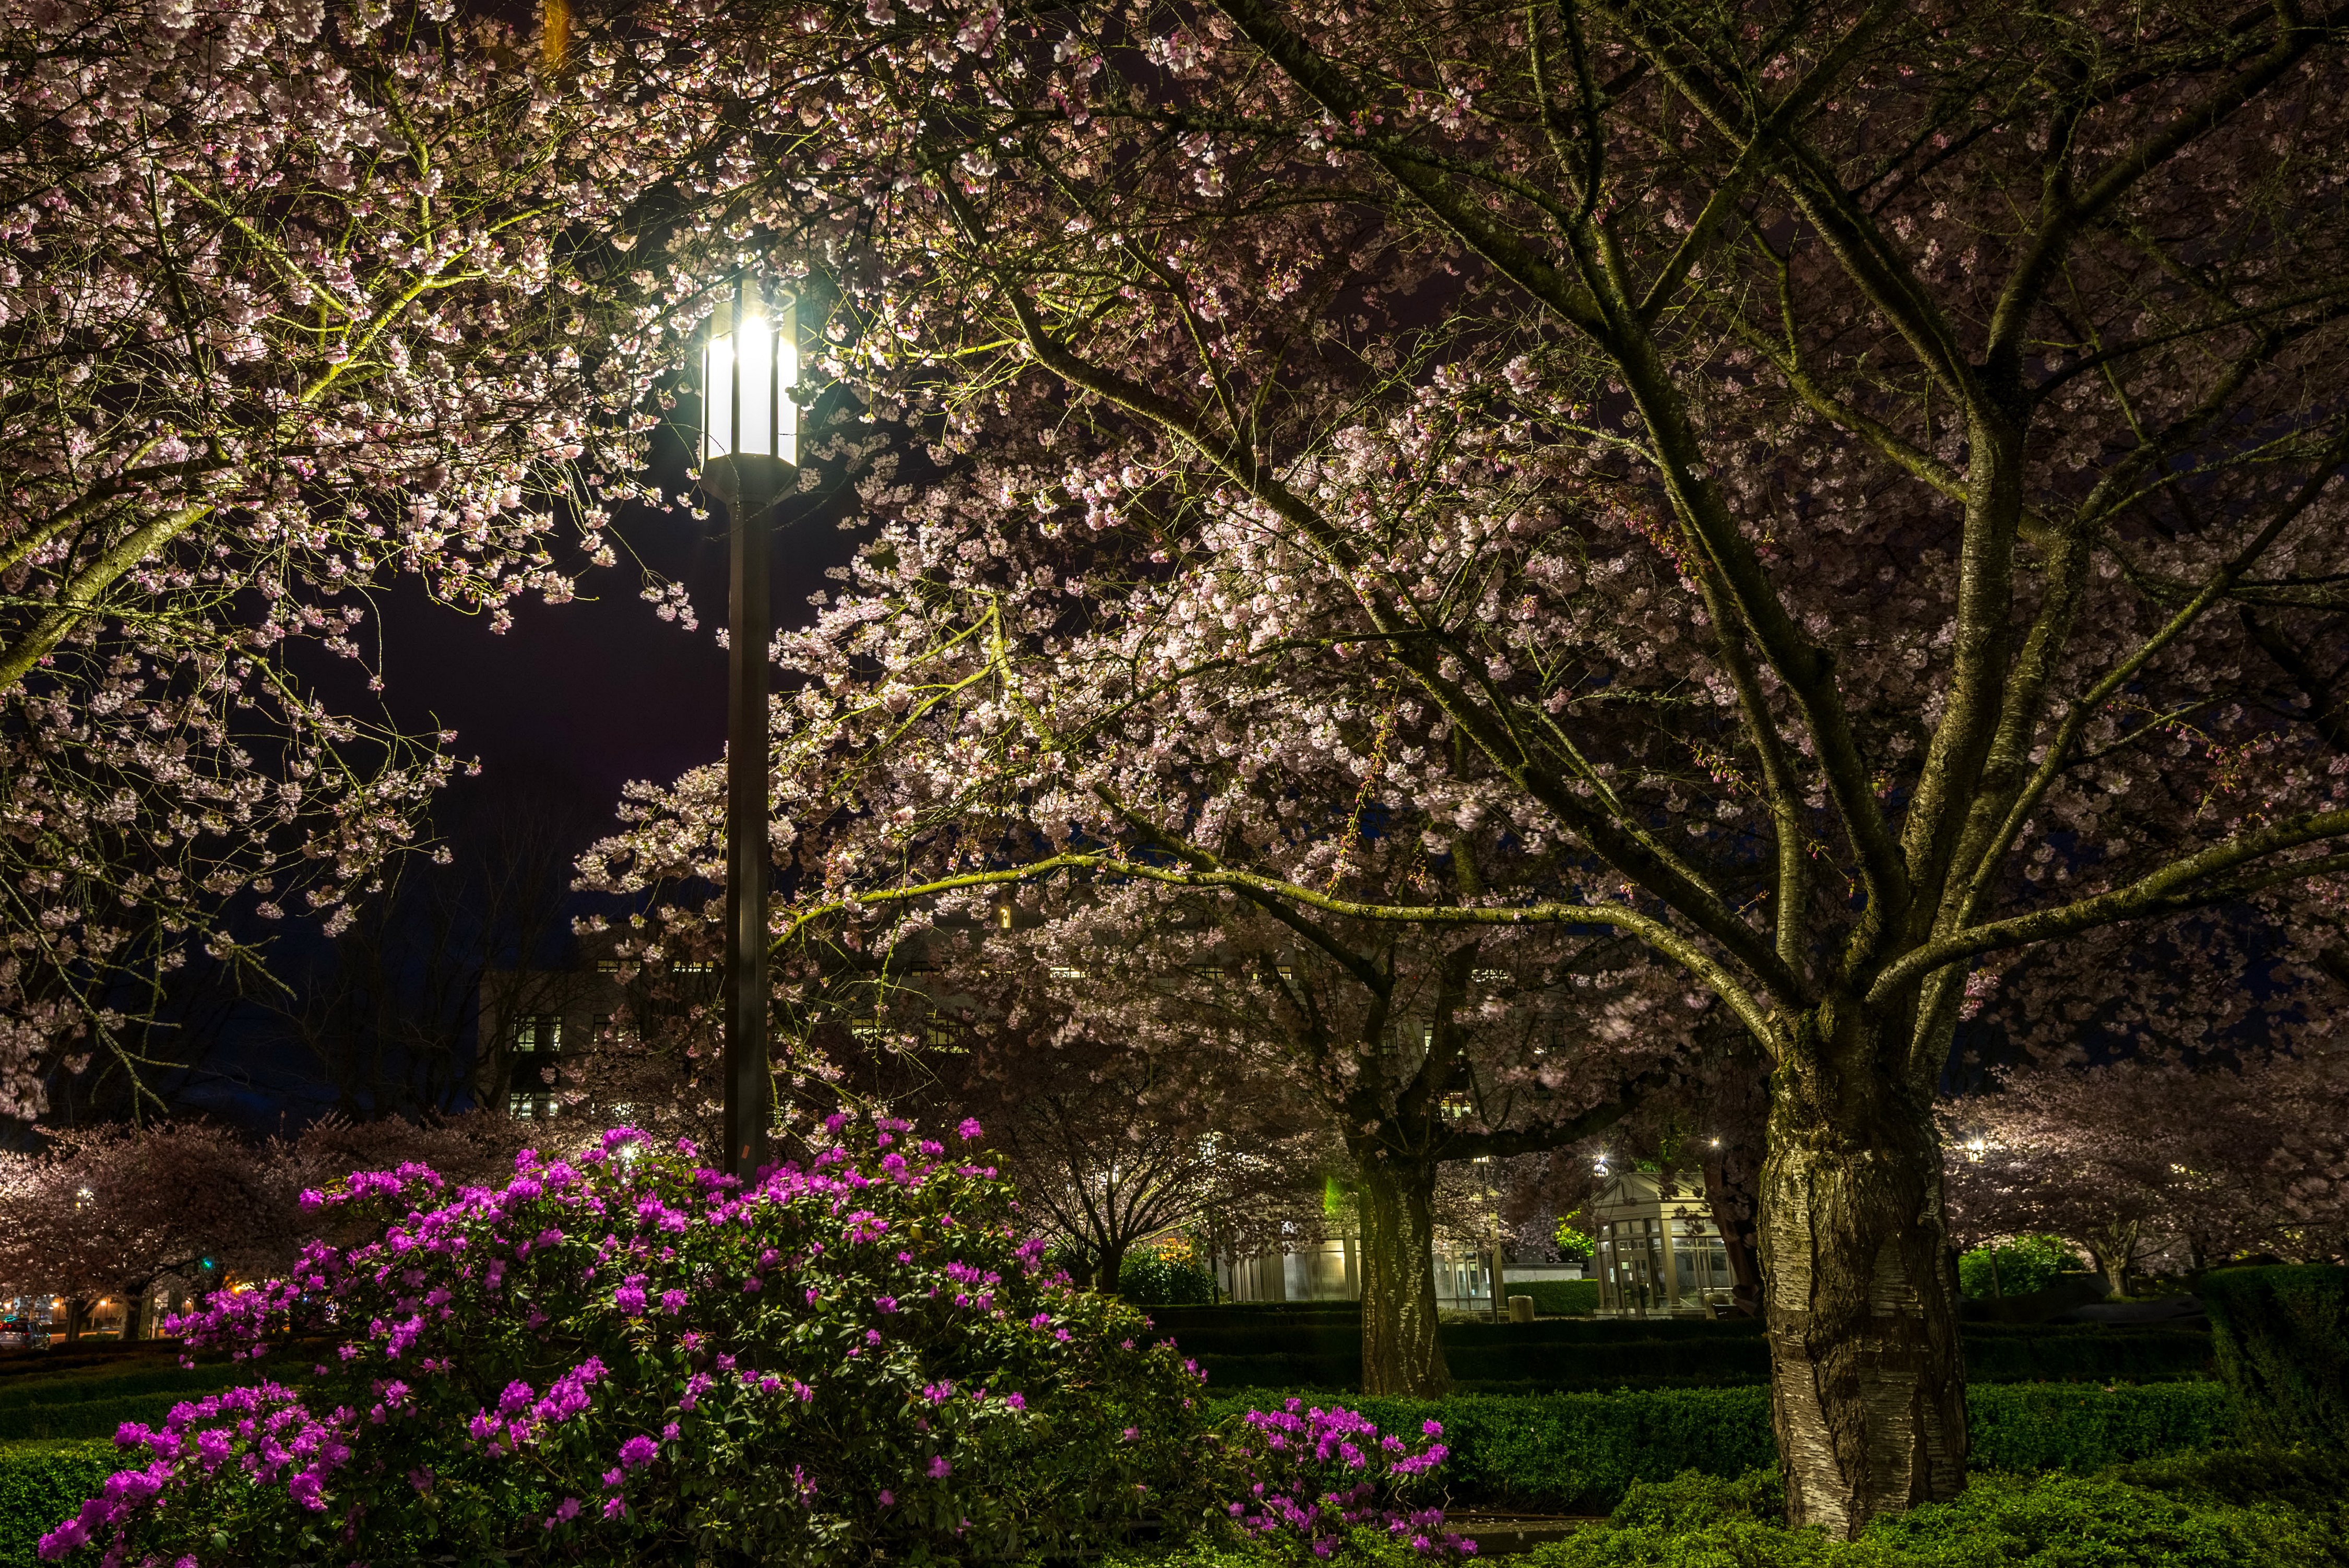 parks, Flowering, Trees, Rhododendron, Night, Street, Lights, Trees, Nature Wallpaper